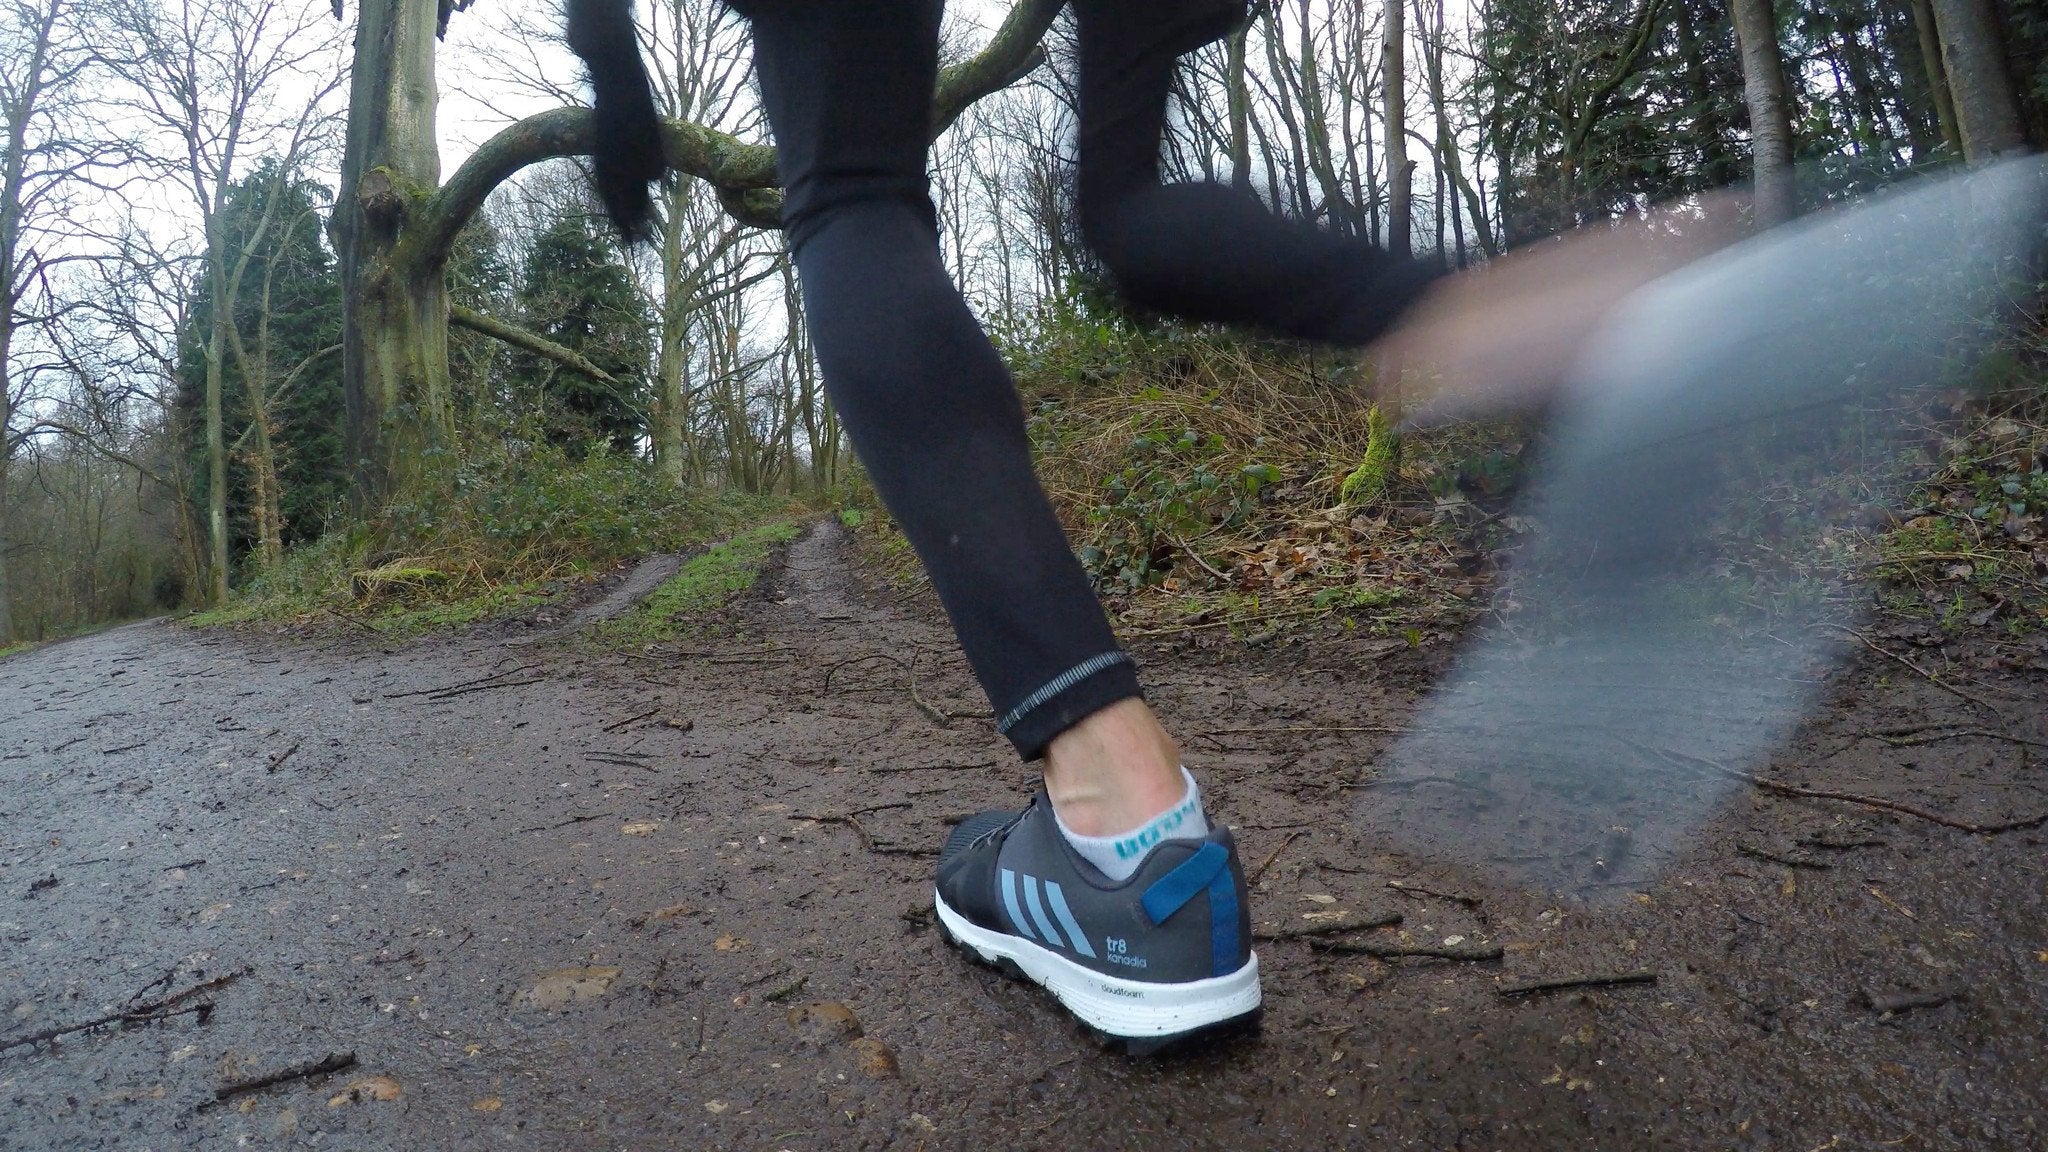 Adidas 8 Trail Running Shoes Review - Sundried